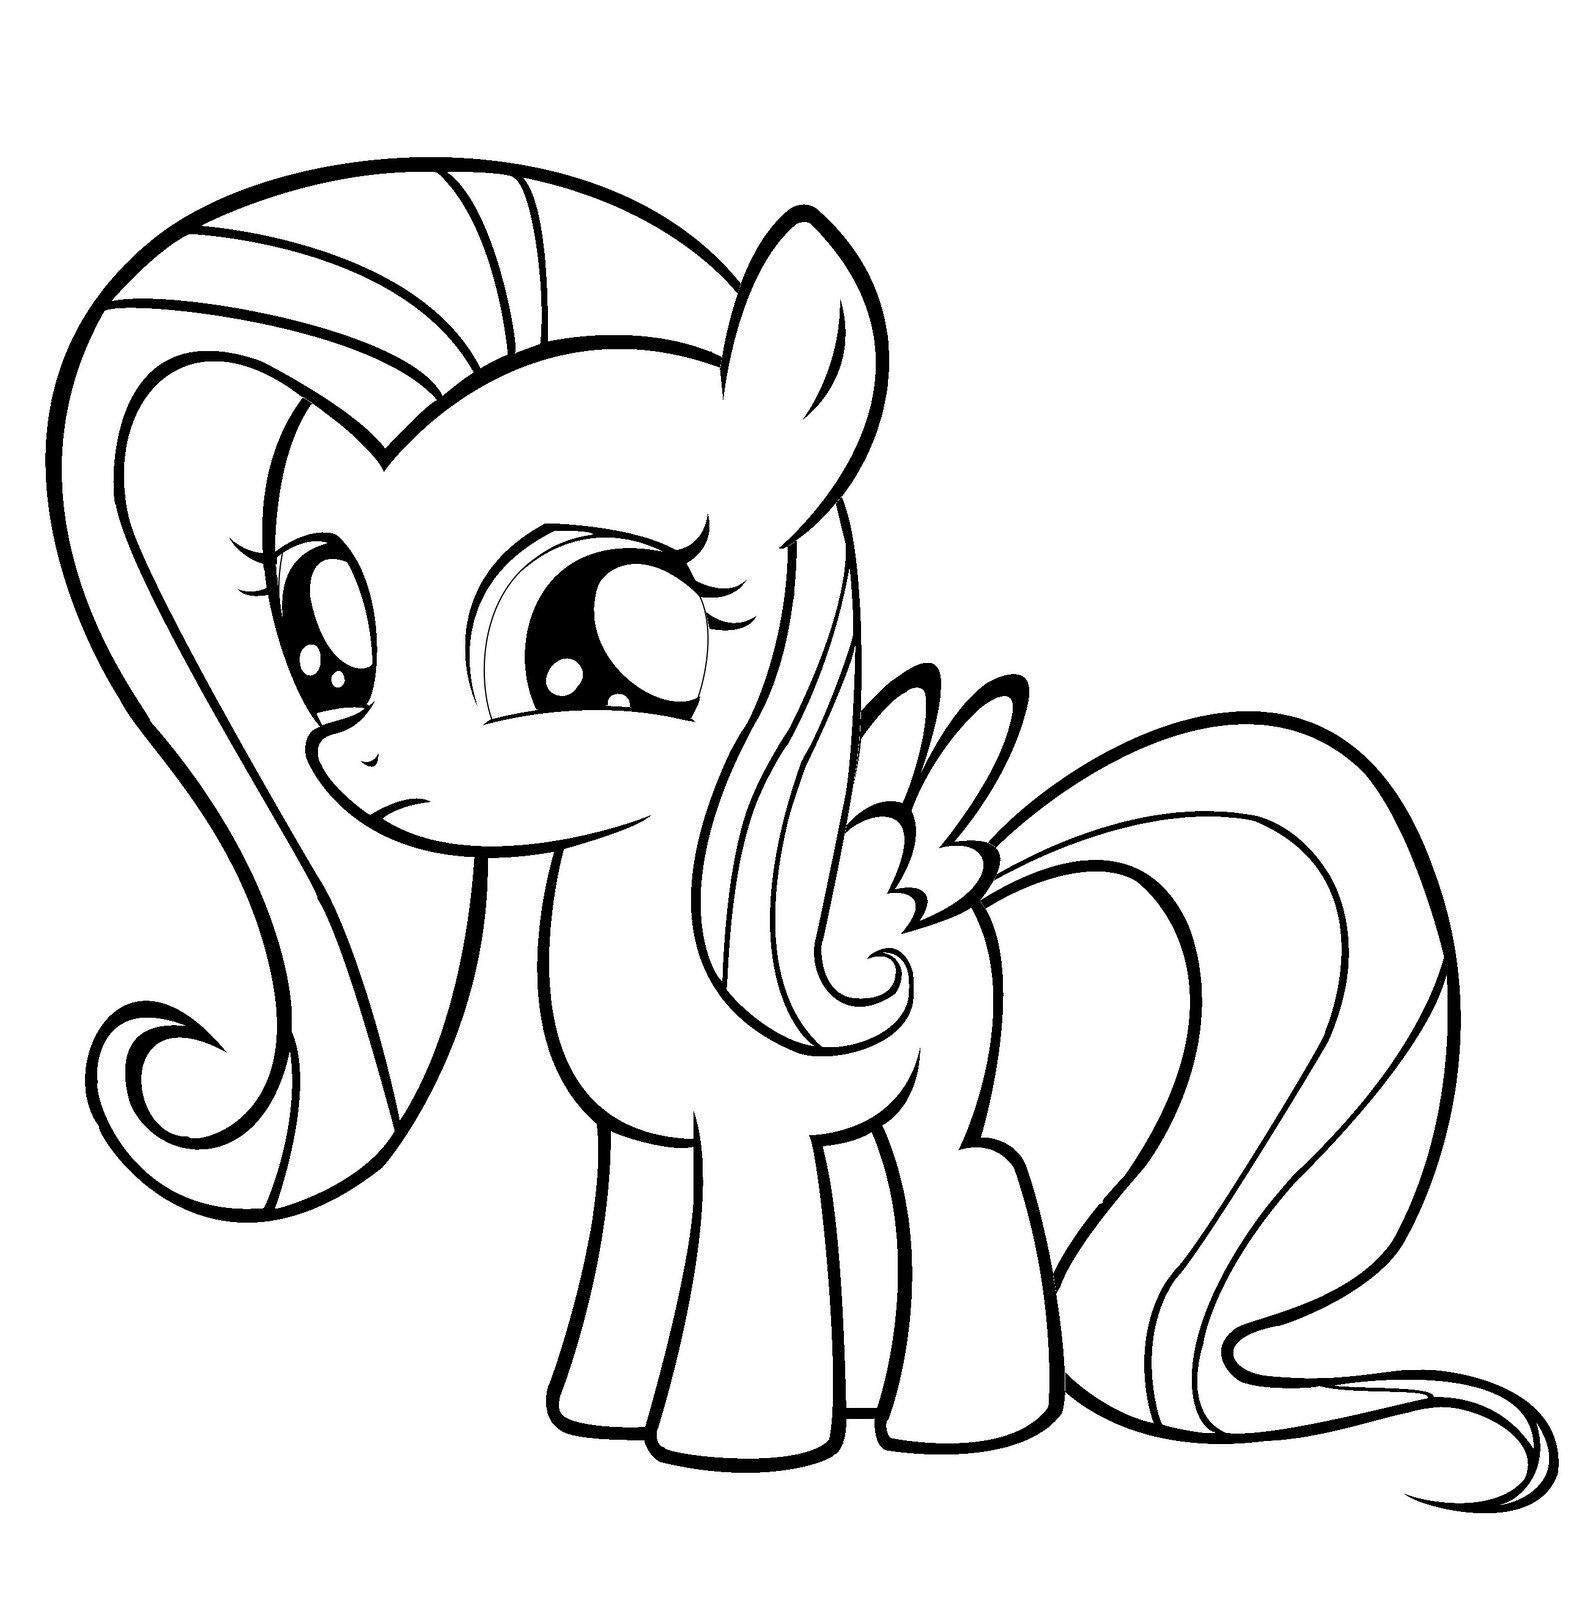 Baby My Little Pony Coloring Pages
 Coloring Fun Young fluttershy